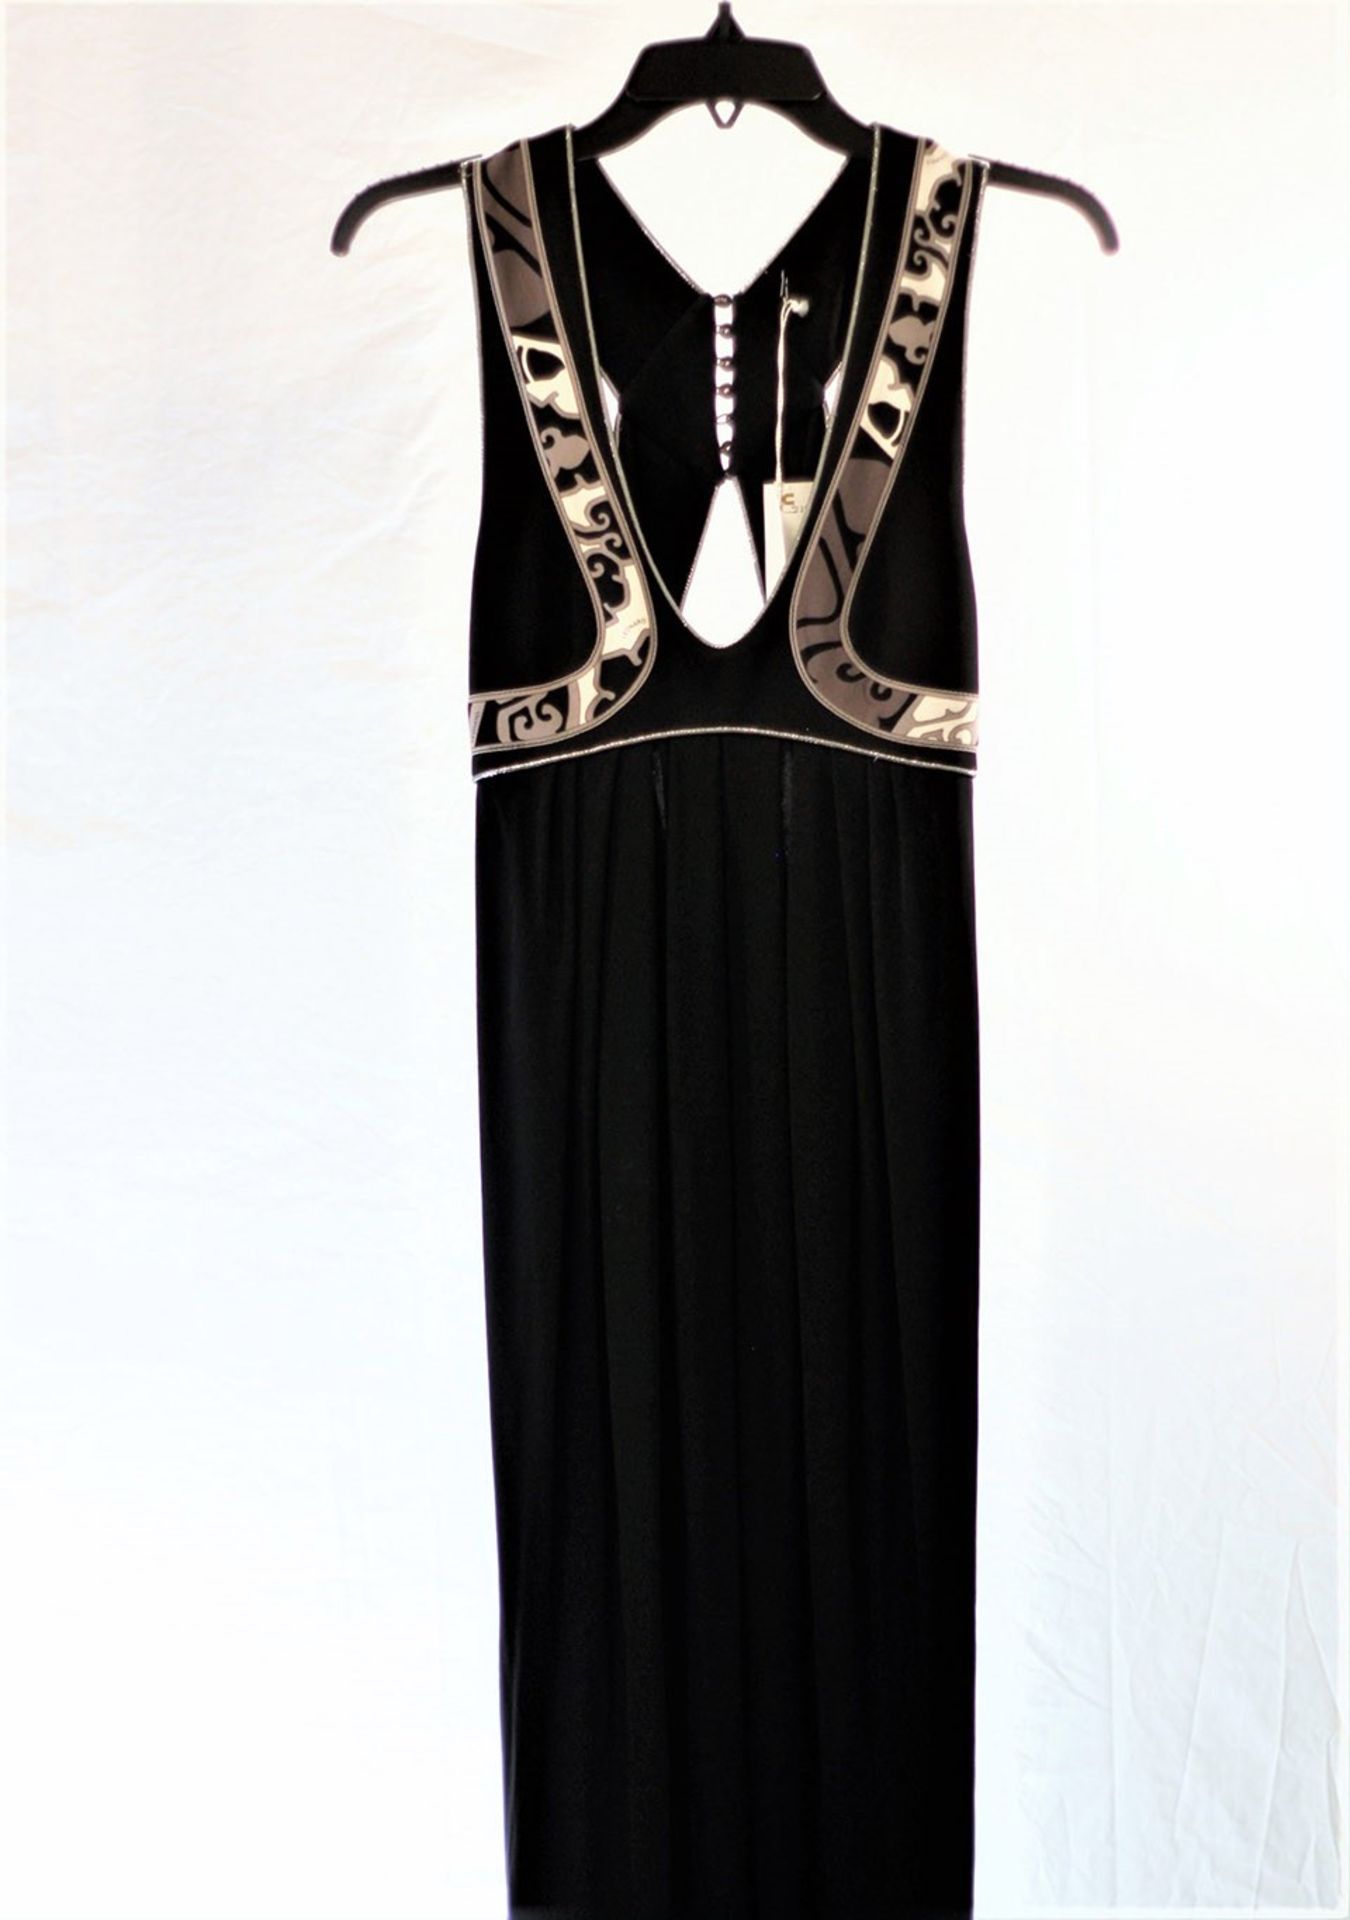 1 x Leonard Paris Black Dress - Size: 10 - Material: 100% Silk - From a High End Clothing Boutique - Image 2 of 8